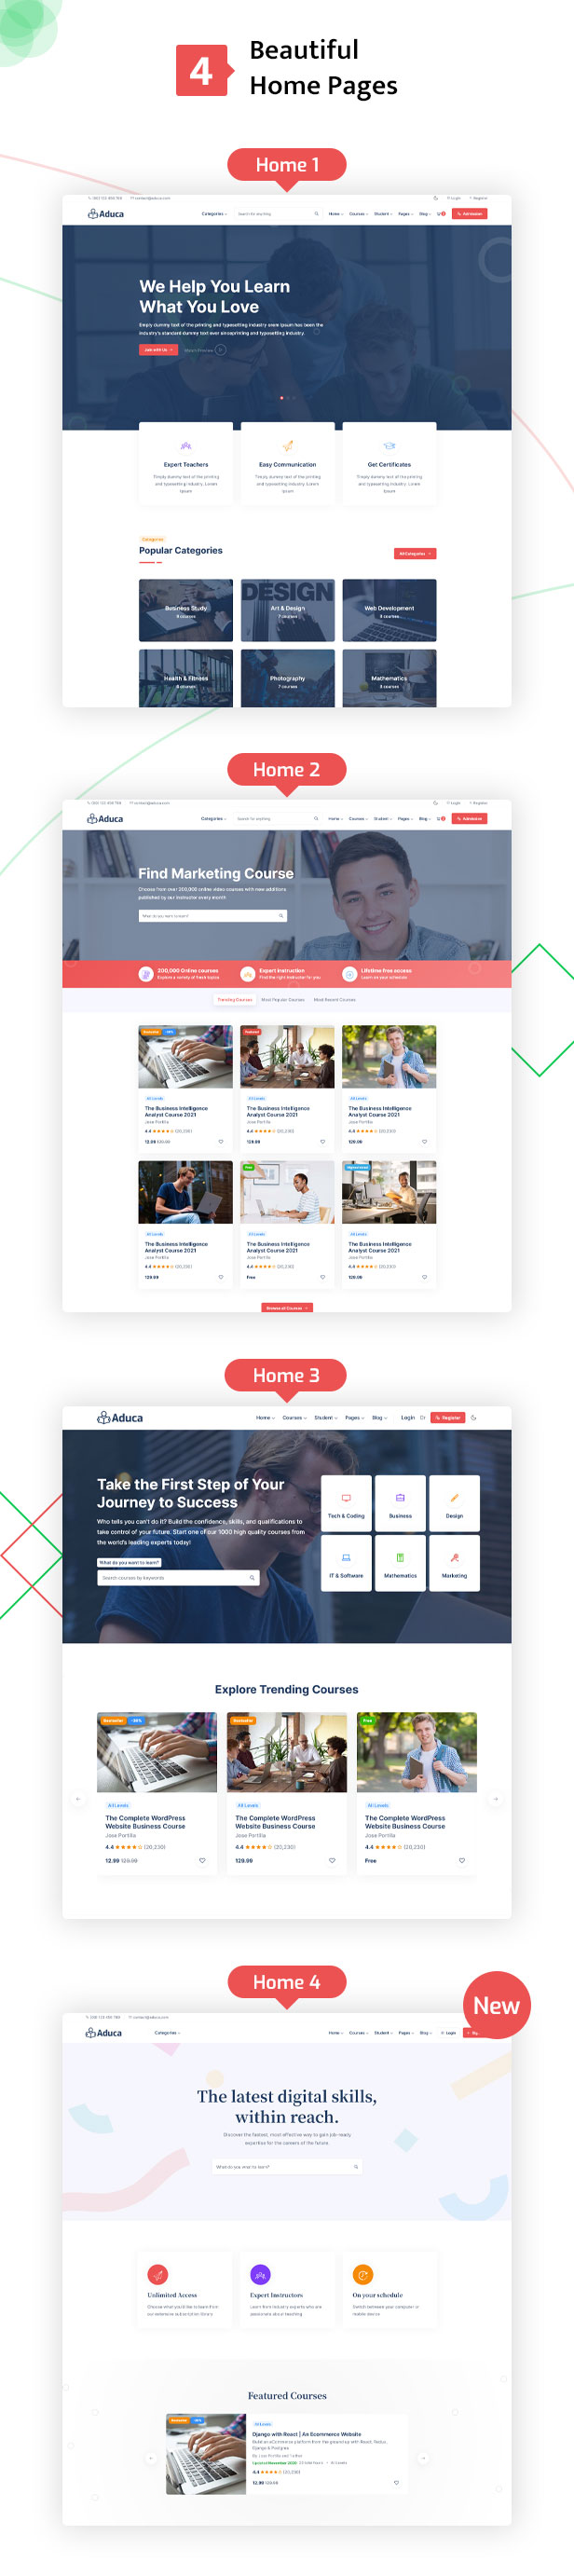 Aduca - Online Education & LMS HTML5 Template